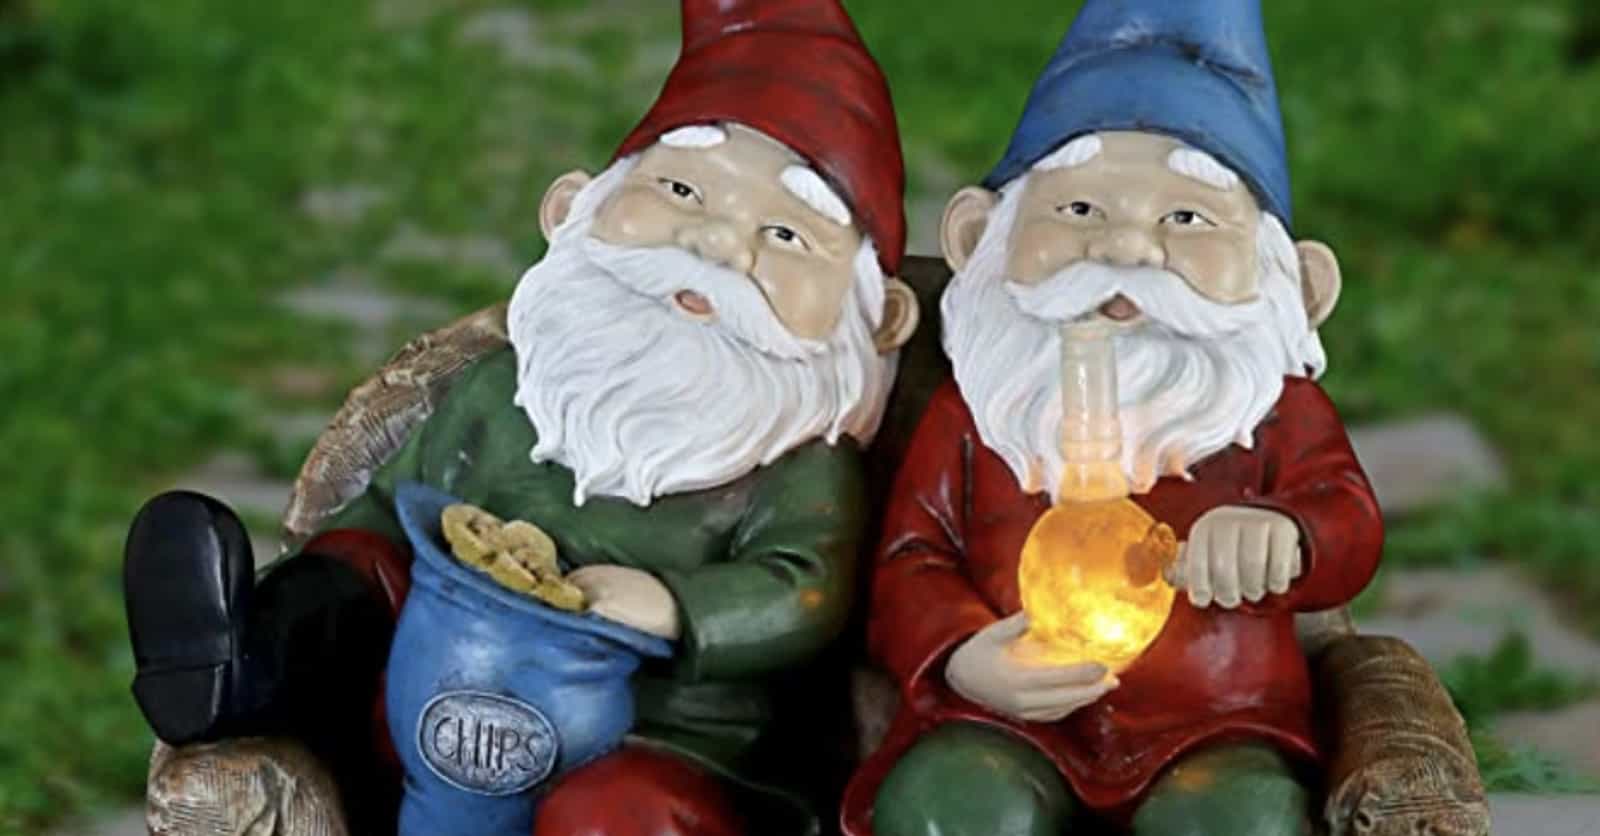 20 Cool Garden Gnomes To Spice Up Your Yard